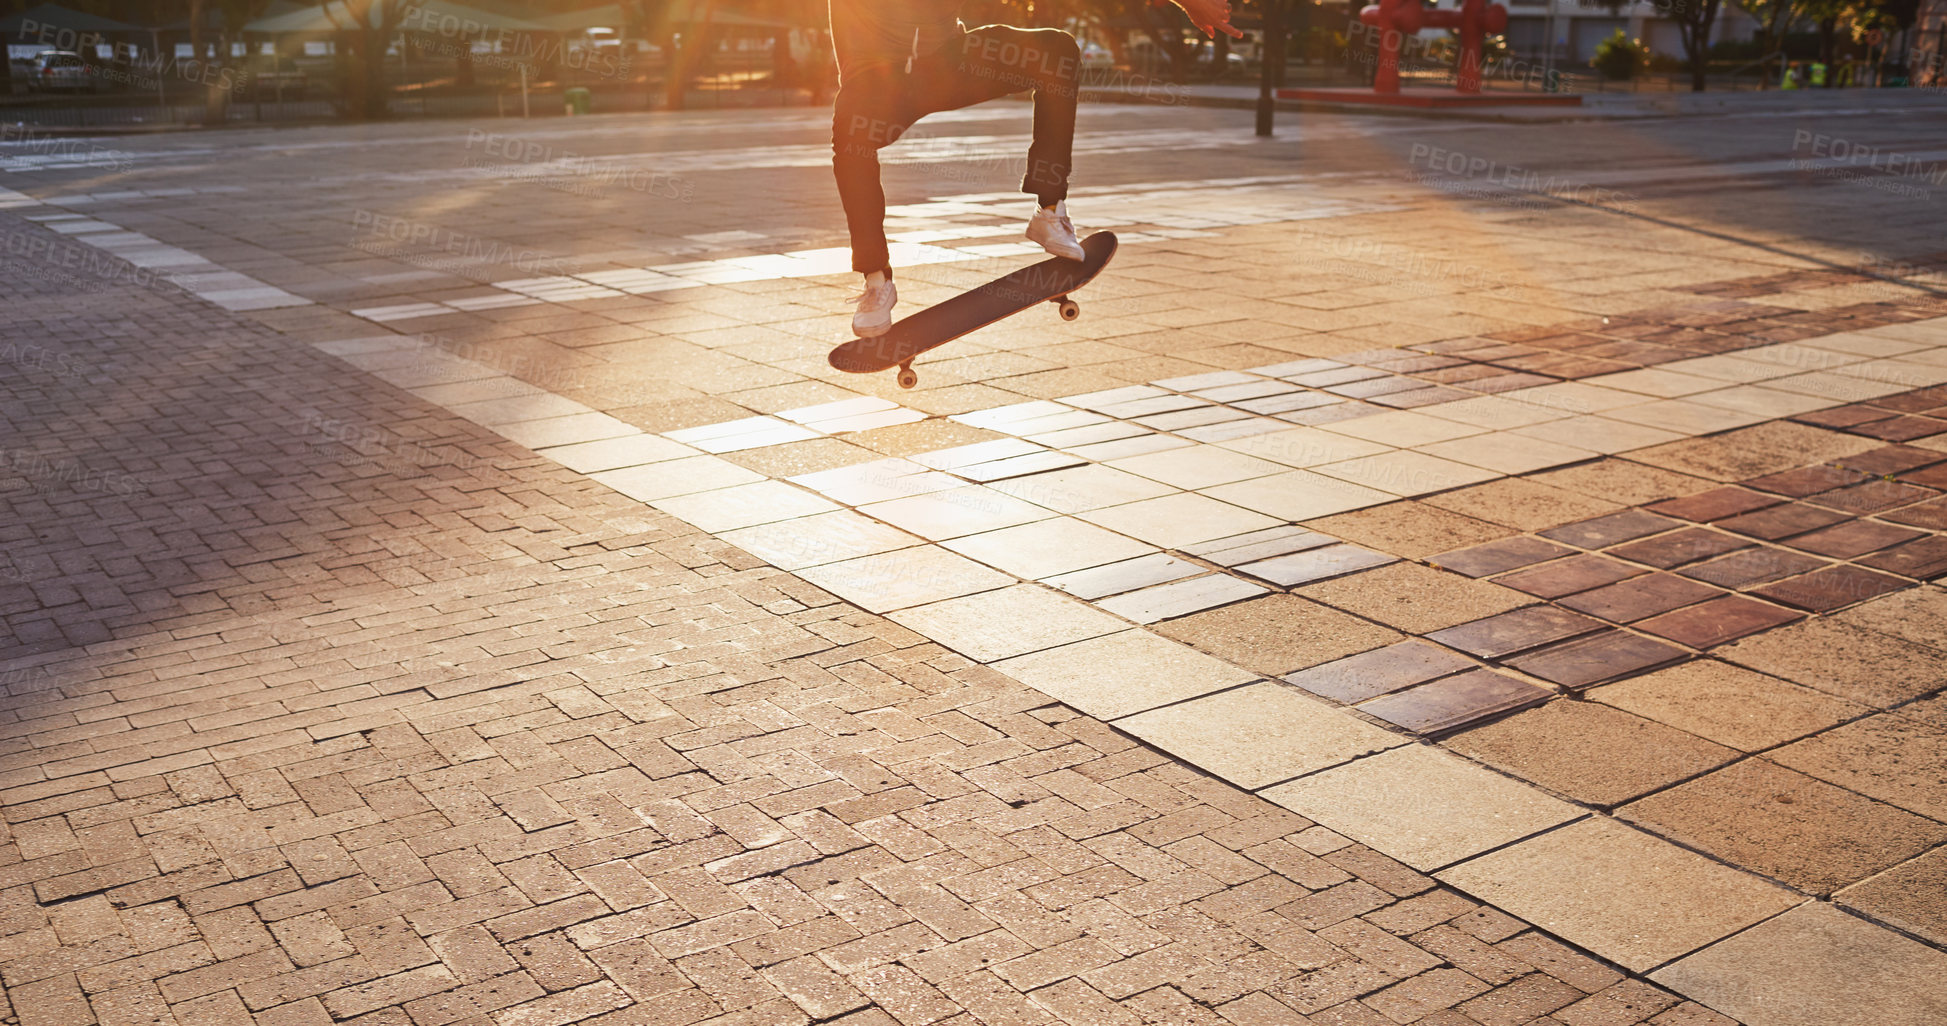 Buy stock photo Cropped shot of a skater doing a trick on his skateboard